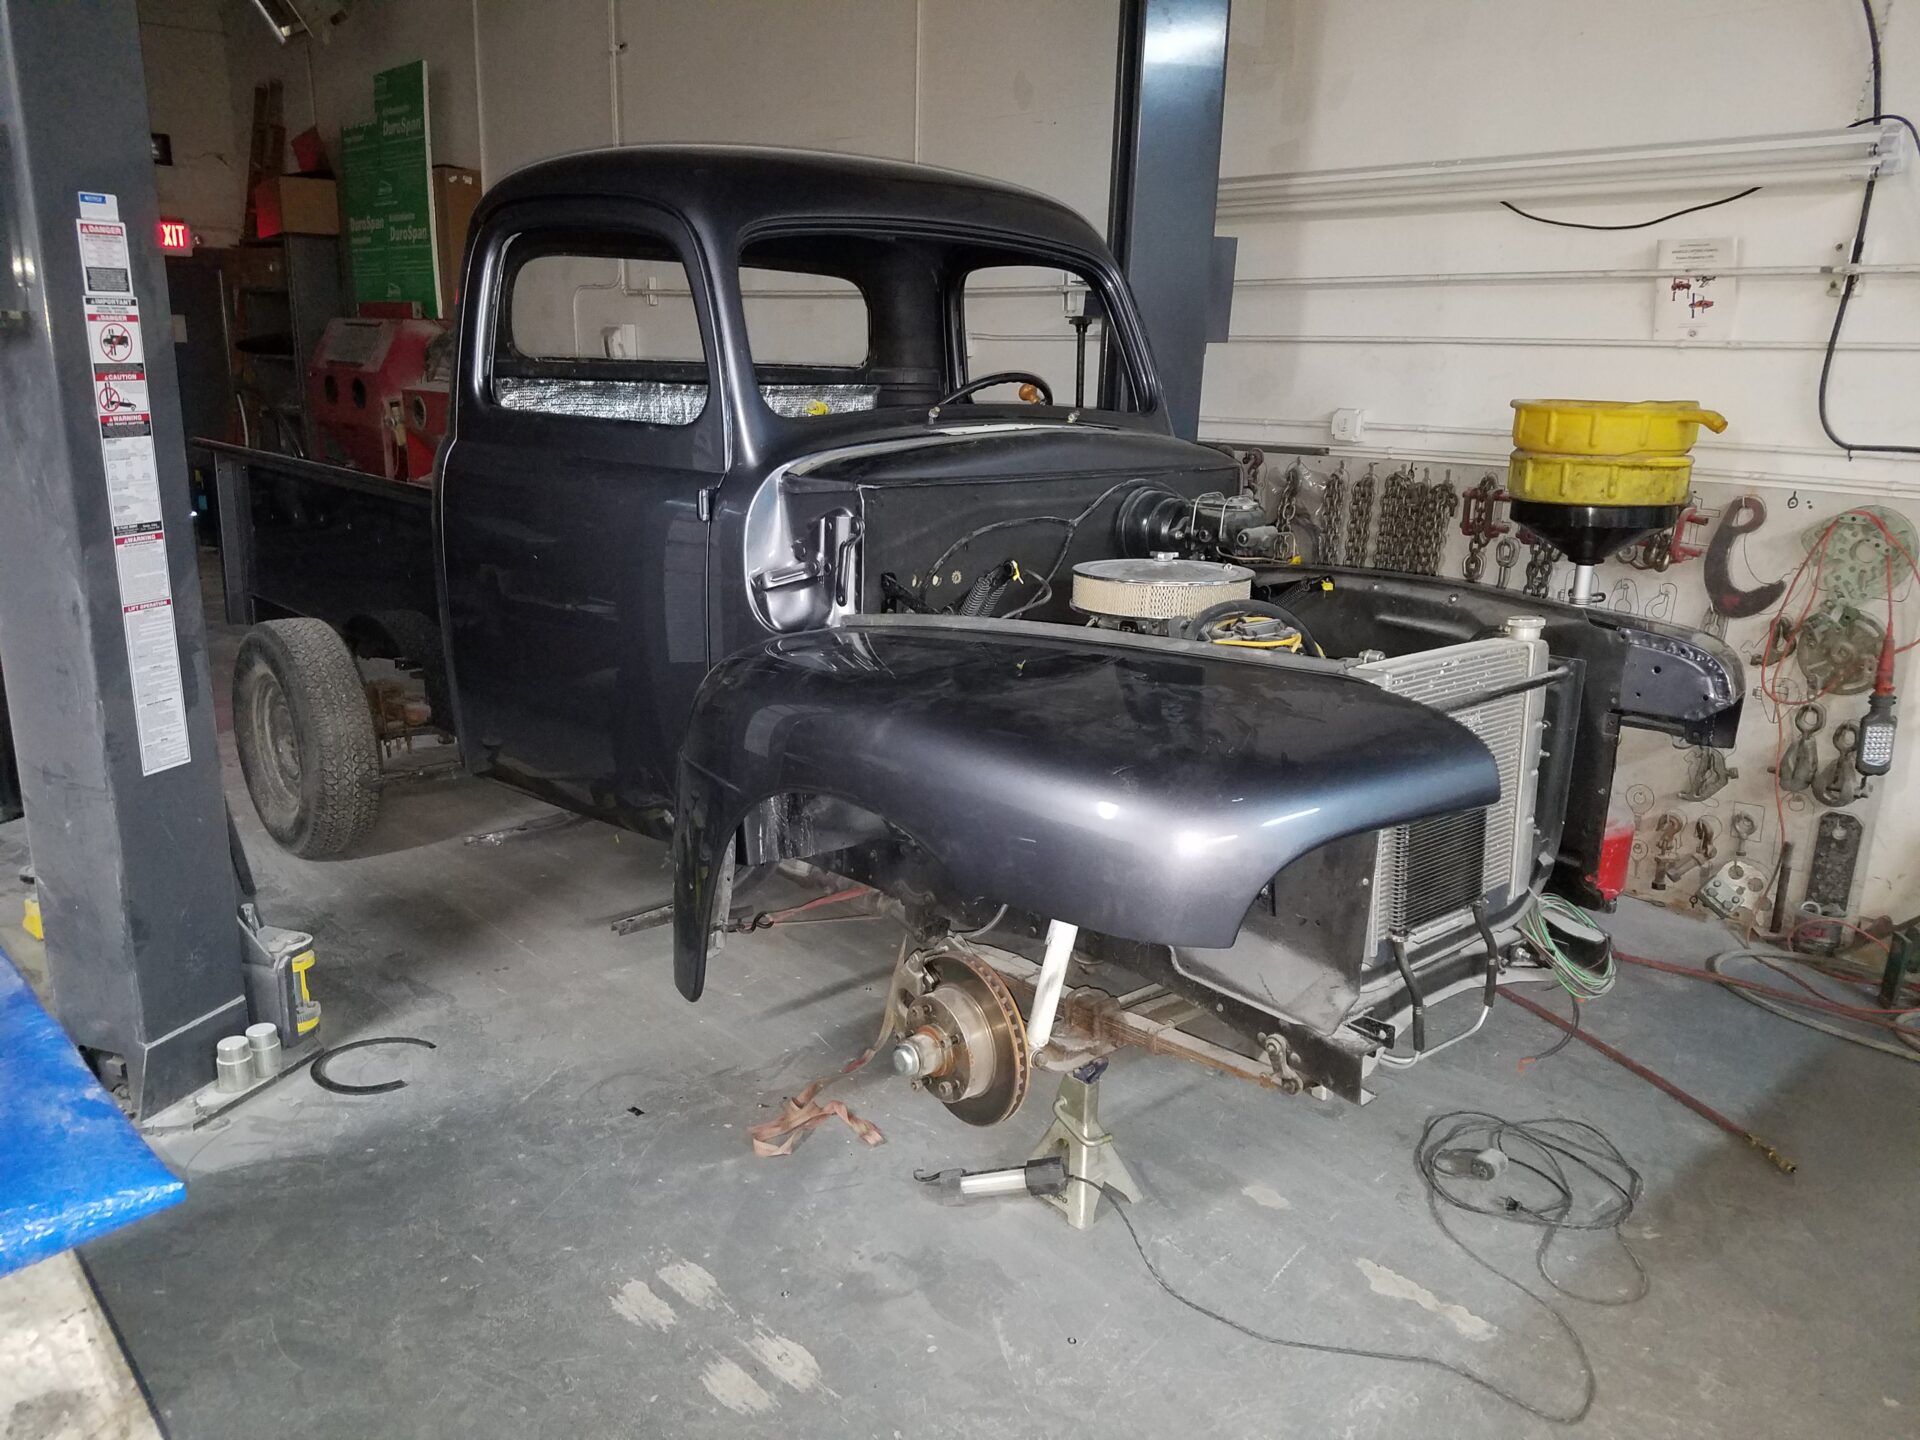 A 1952 Ford F100 model being assembled